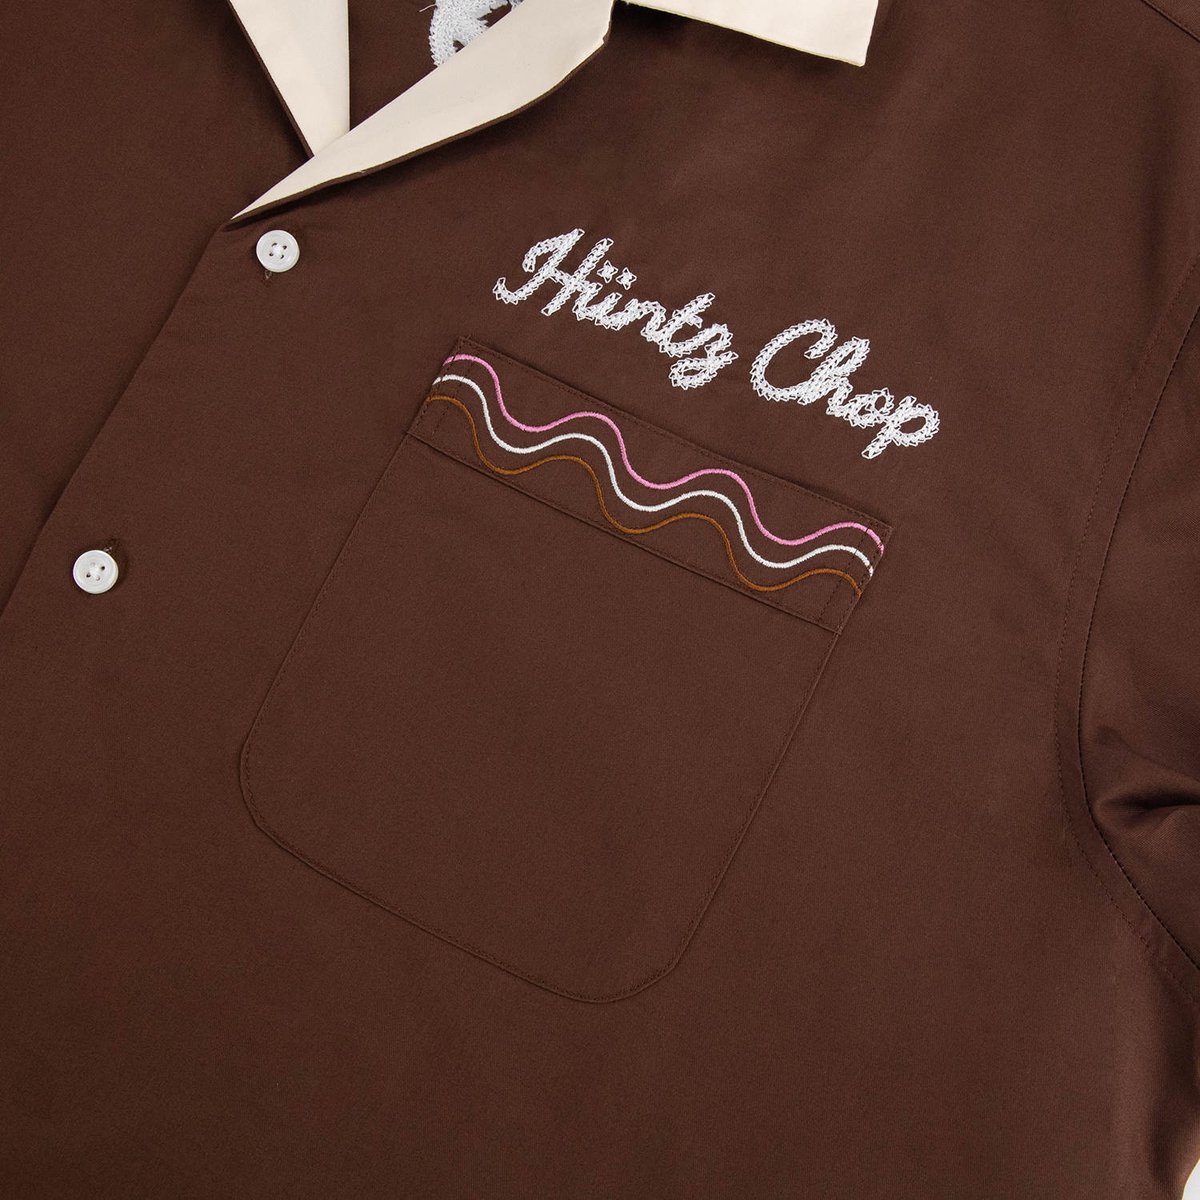 Image of Hüntz Chop Ice Cream Parlor Button Up Shirt 